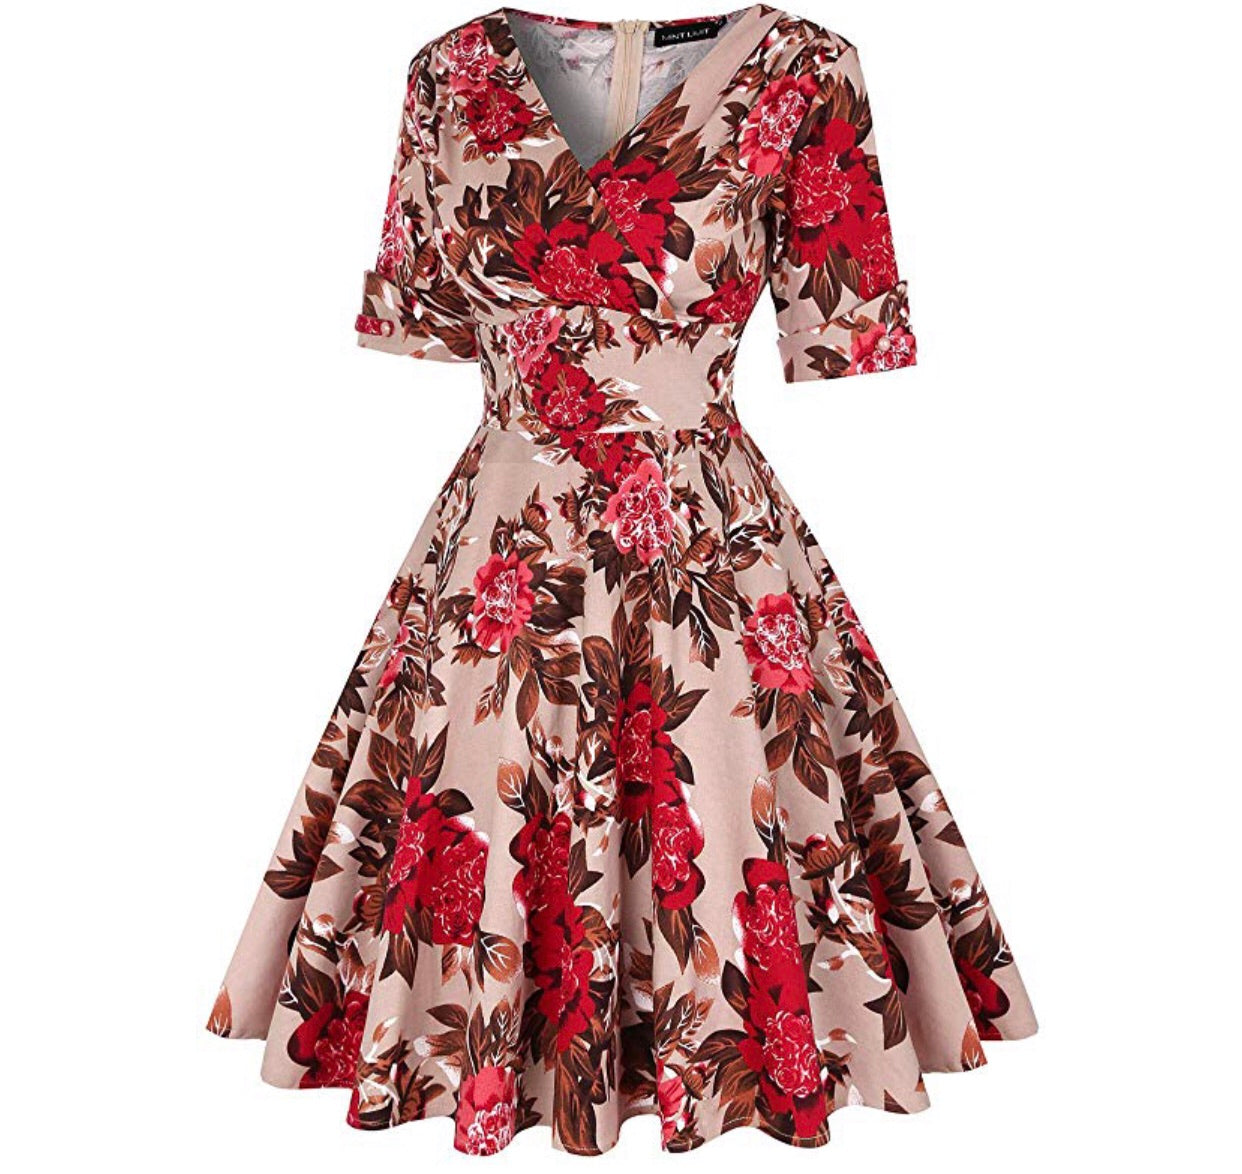 V-Neck Retro Look Swing Dress, Sizes Small - 2XLarge (US Sizes 4 - 22) Floral Red